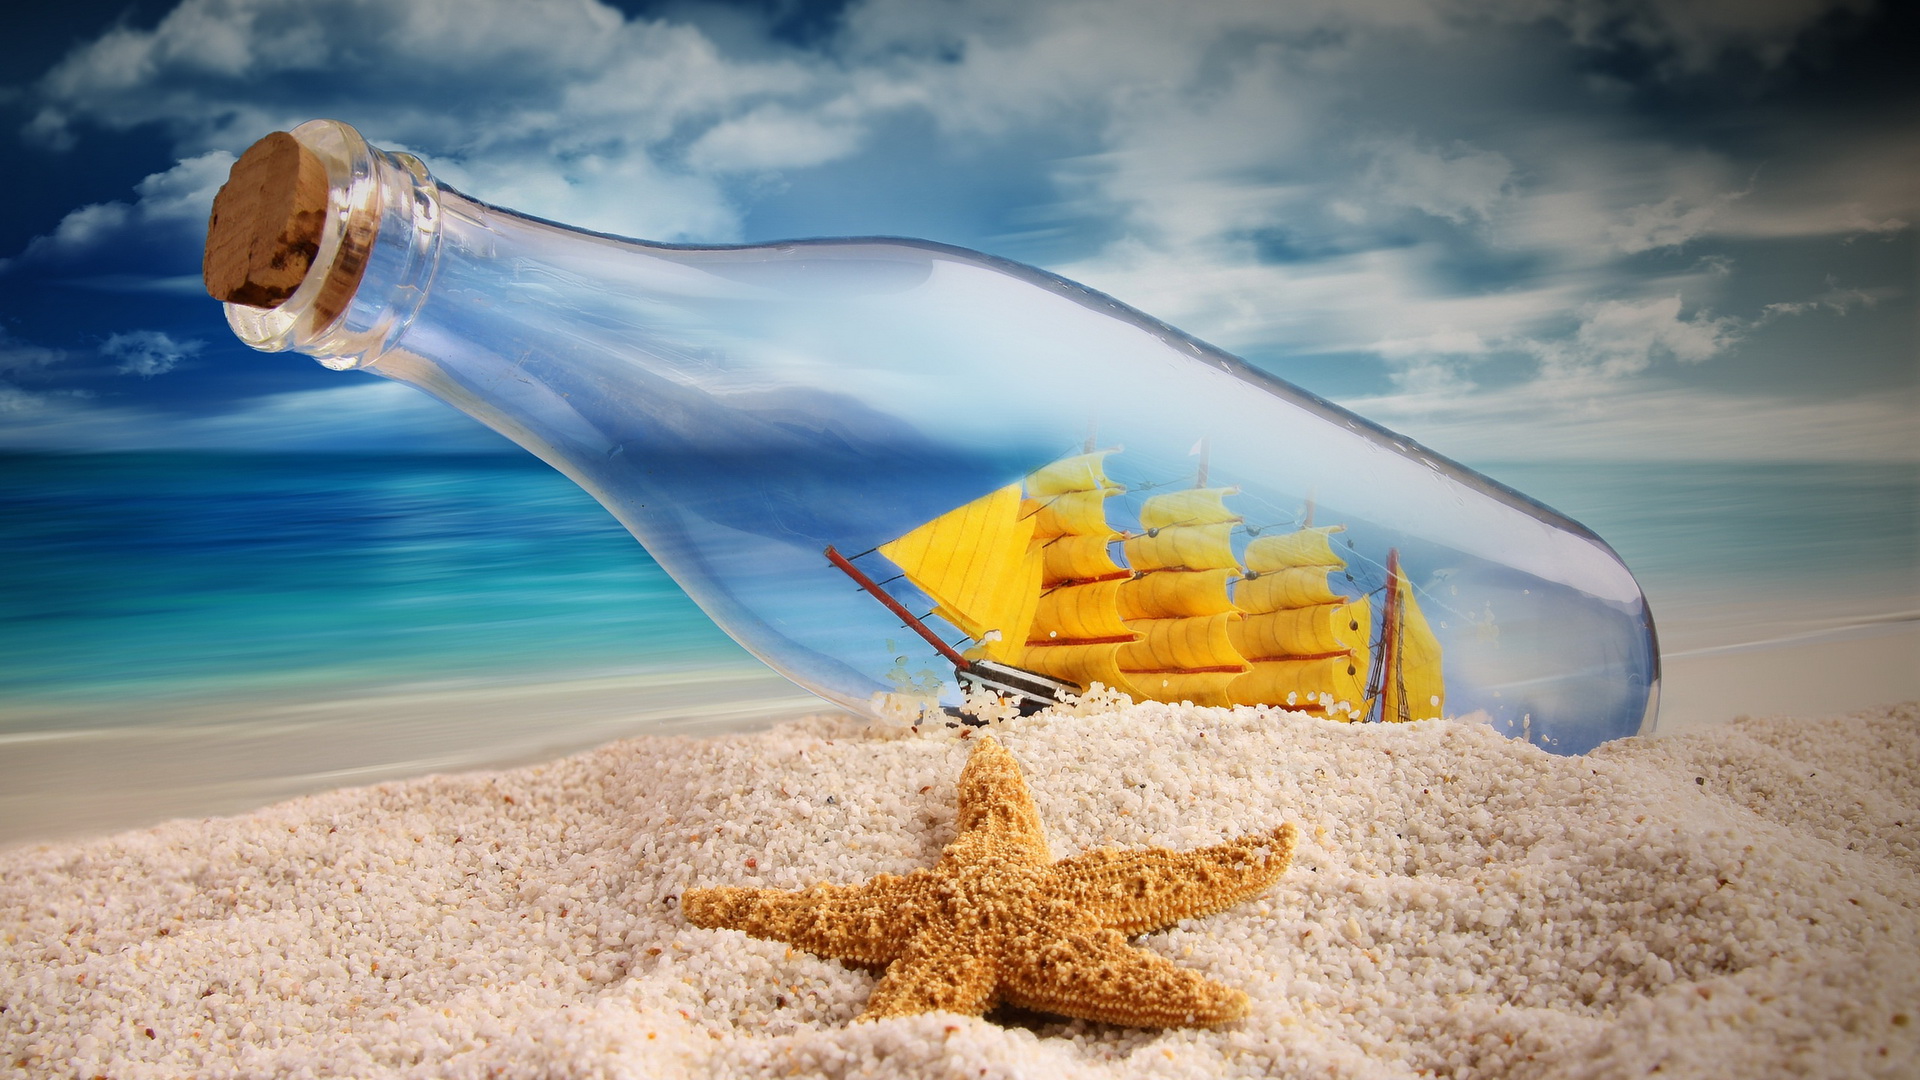 Man Made Ship In A Bottle 1920x1080